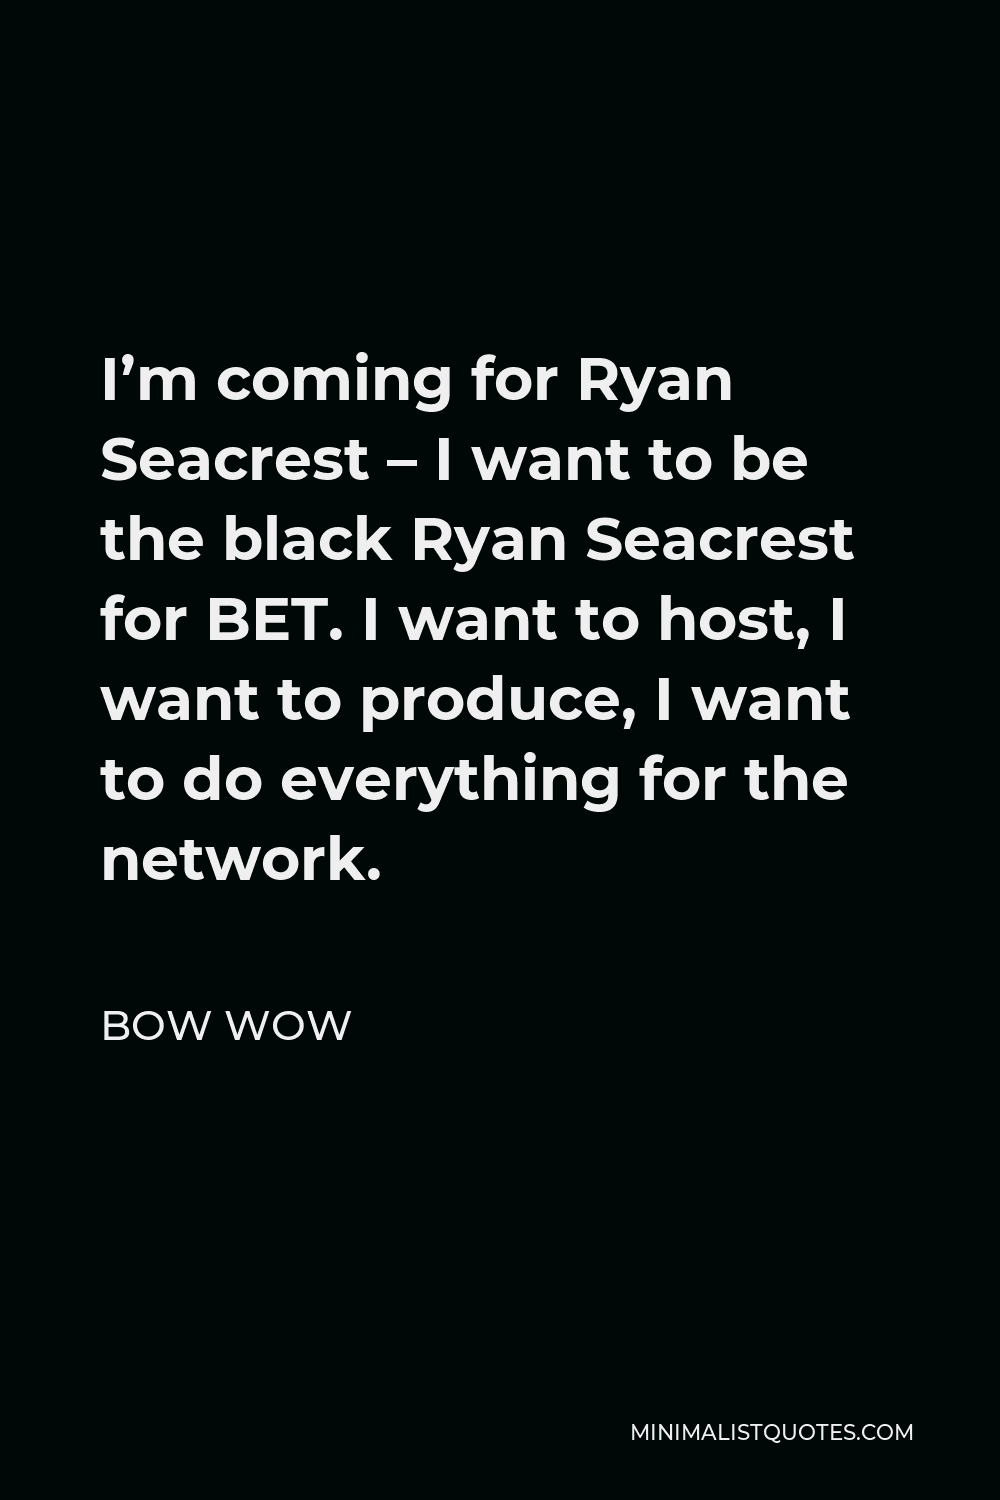 Bow Wow Quote - I’m coming for Ryan Seacrest – I want to be the black Ryan Seacrest for BET. I want to host, I want to produce, I want to do everything for the network.